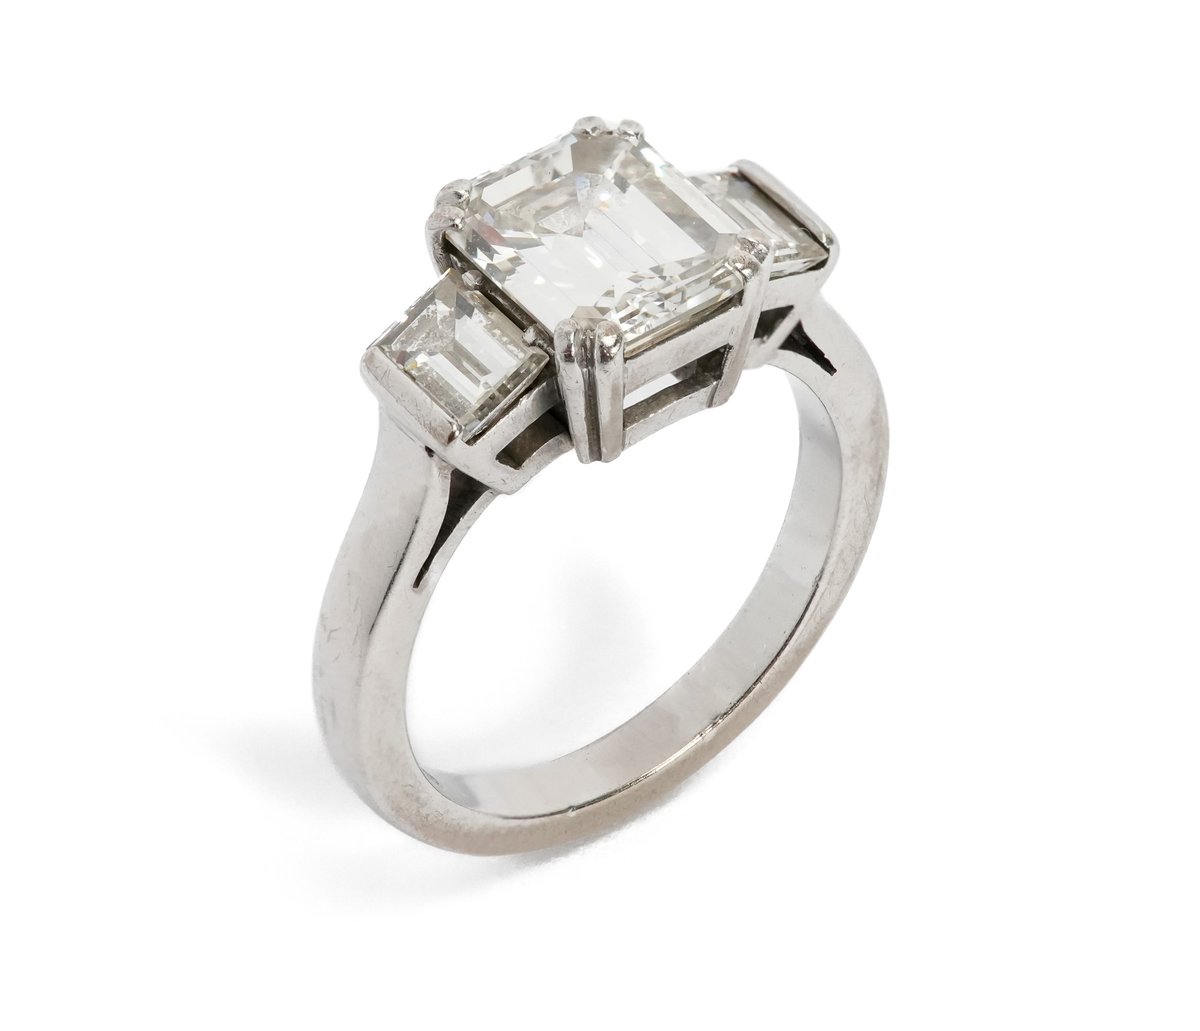 Coming up in this Thursday's Sale: Lot 116 Art Deco Style 2ct Emerald Cut Diamond Ring £3,000-4,000. #diamondring #engagementring #2ctdiamondring